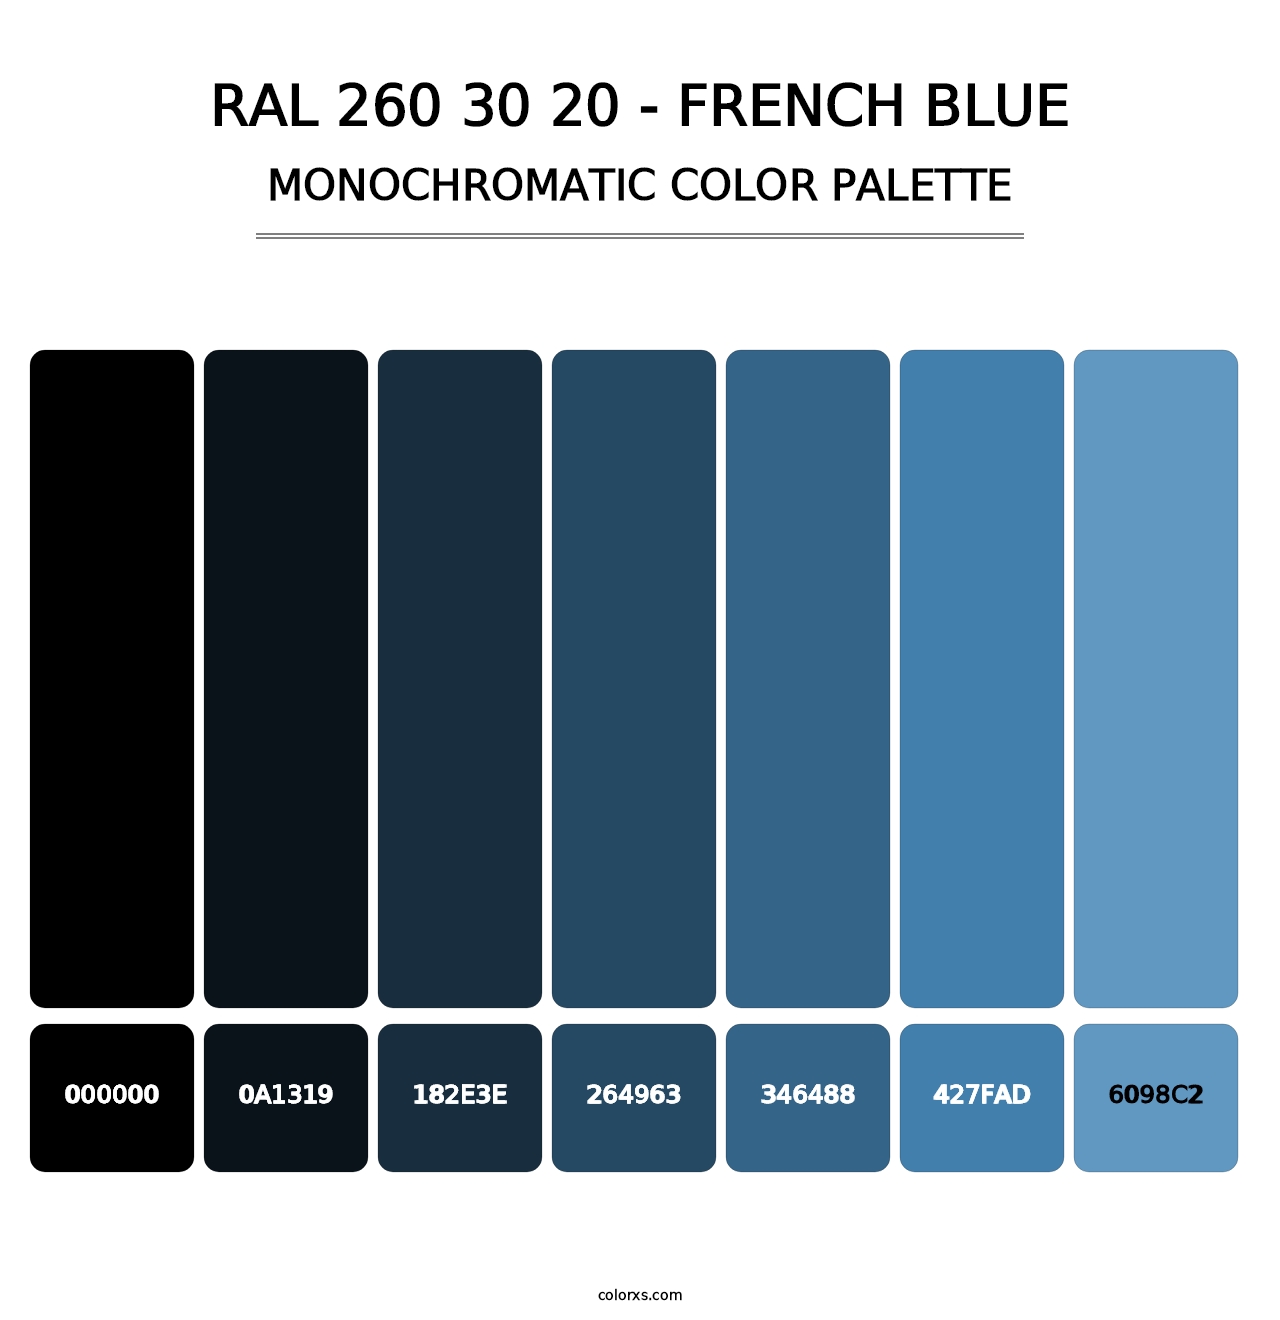 RAL 260 30 20 - French Blue - Monochromatic Color Palette